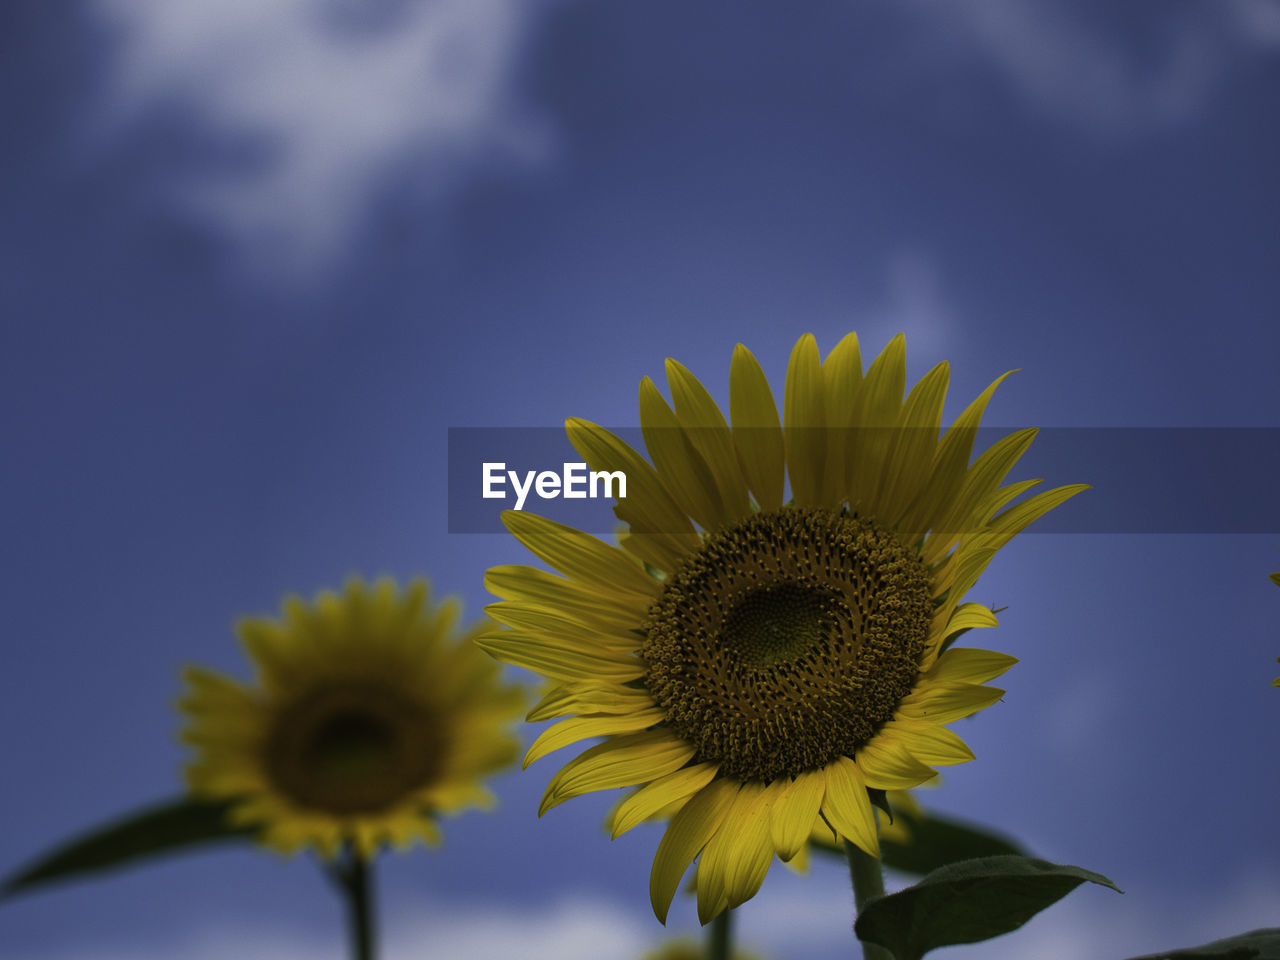 CLOSE-UP OF SUNFLOWER ON PLANT AGAINST SKY